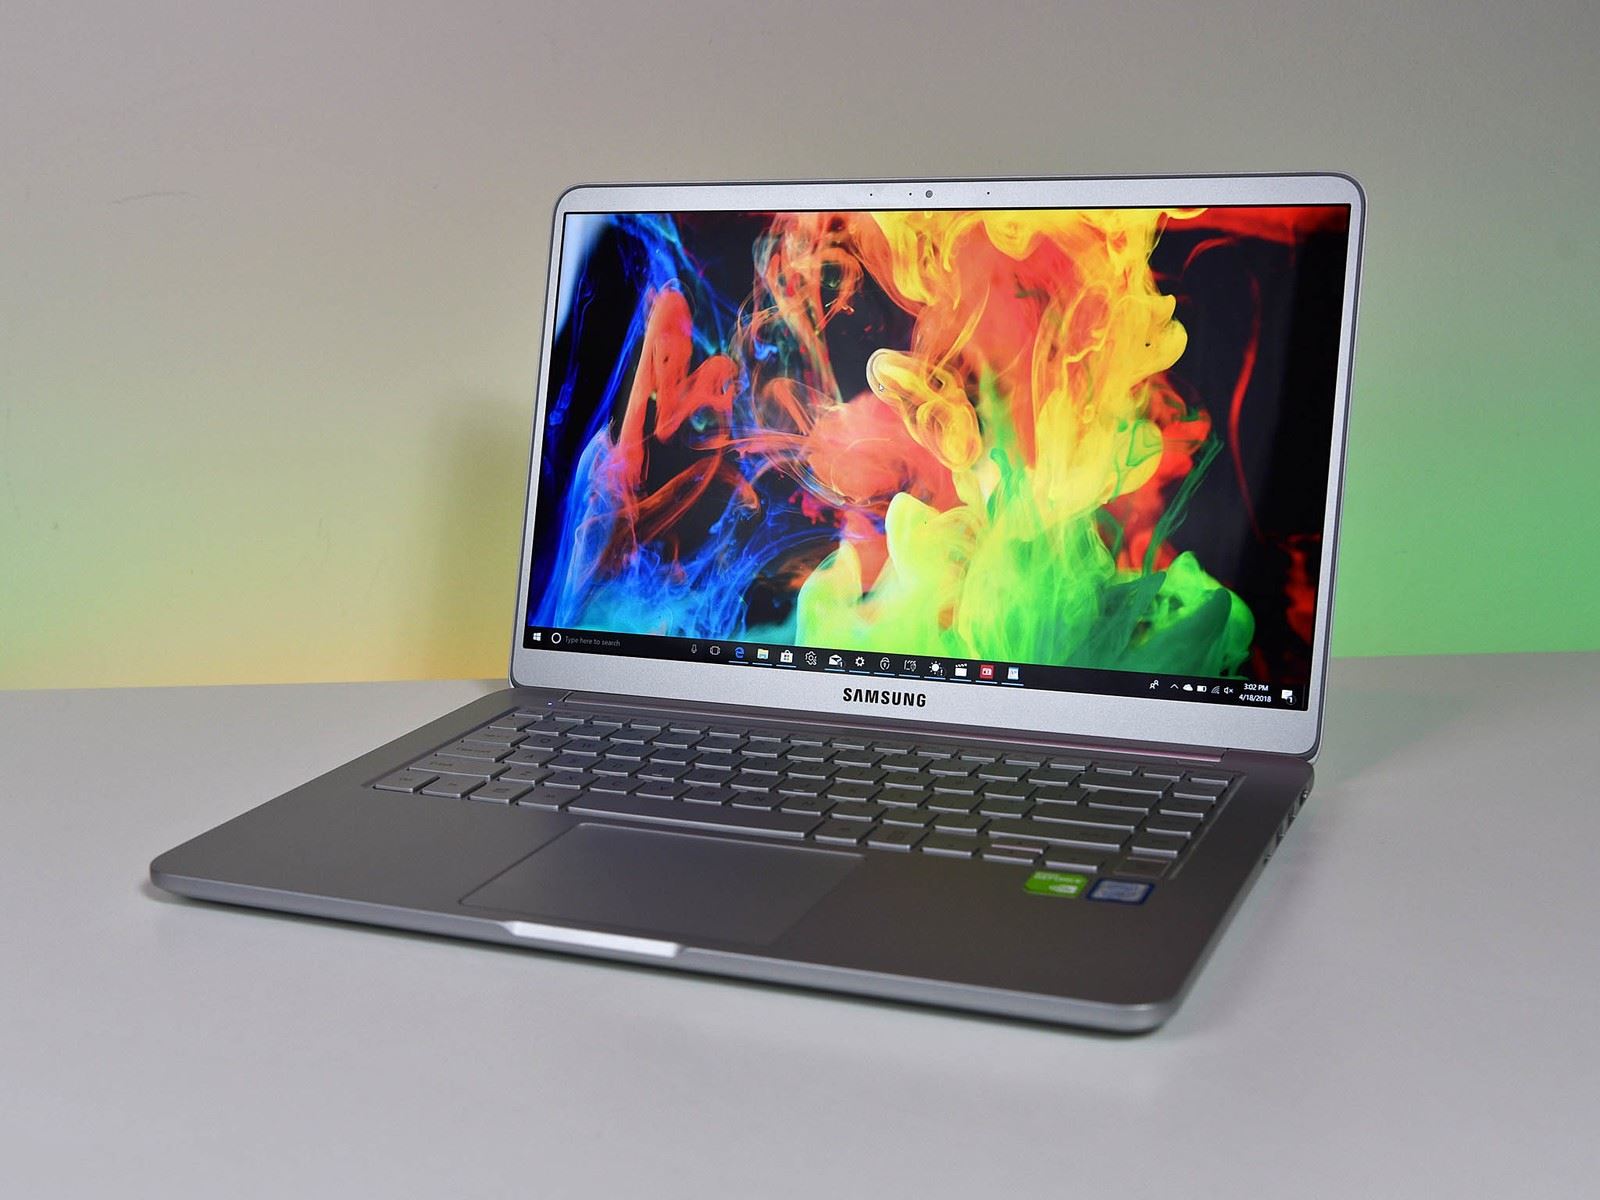 Samsung Notebook 9 (2018) review